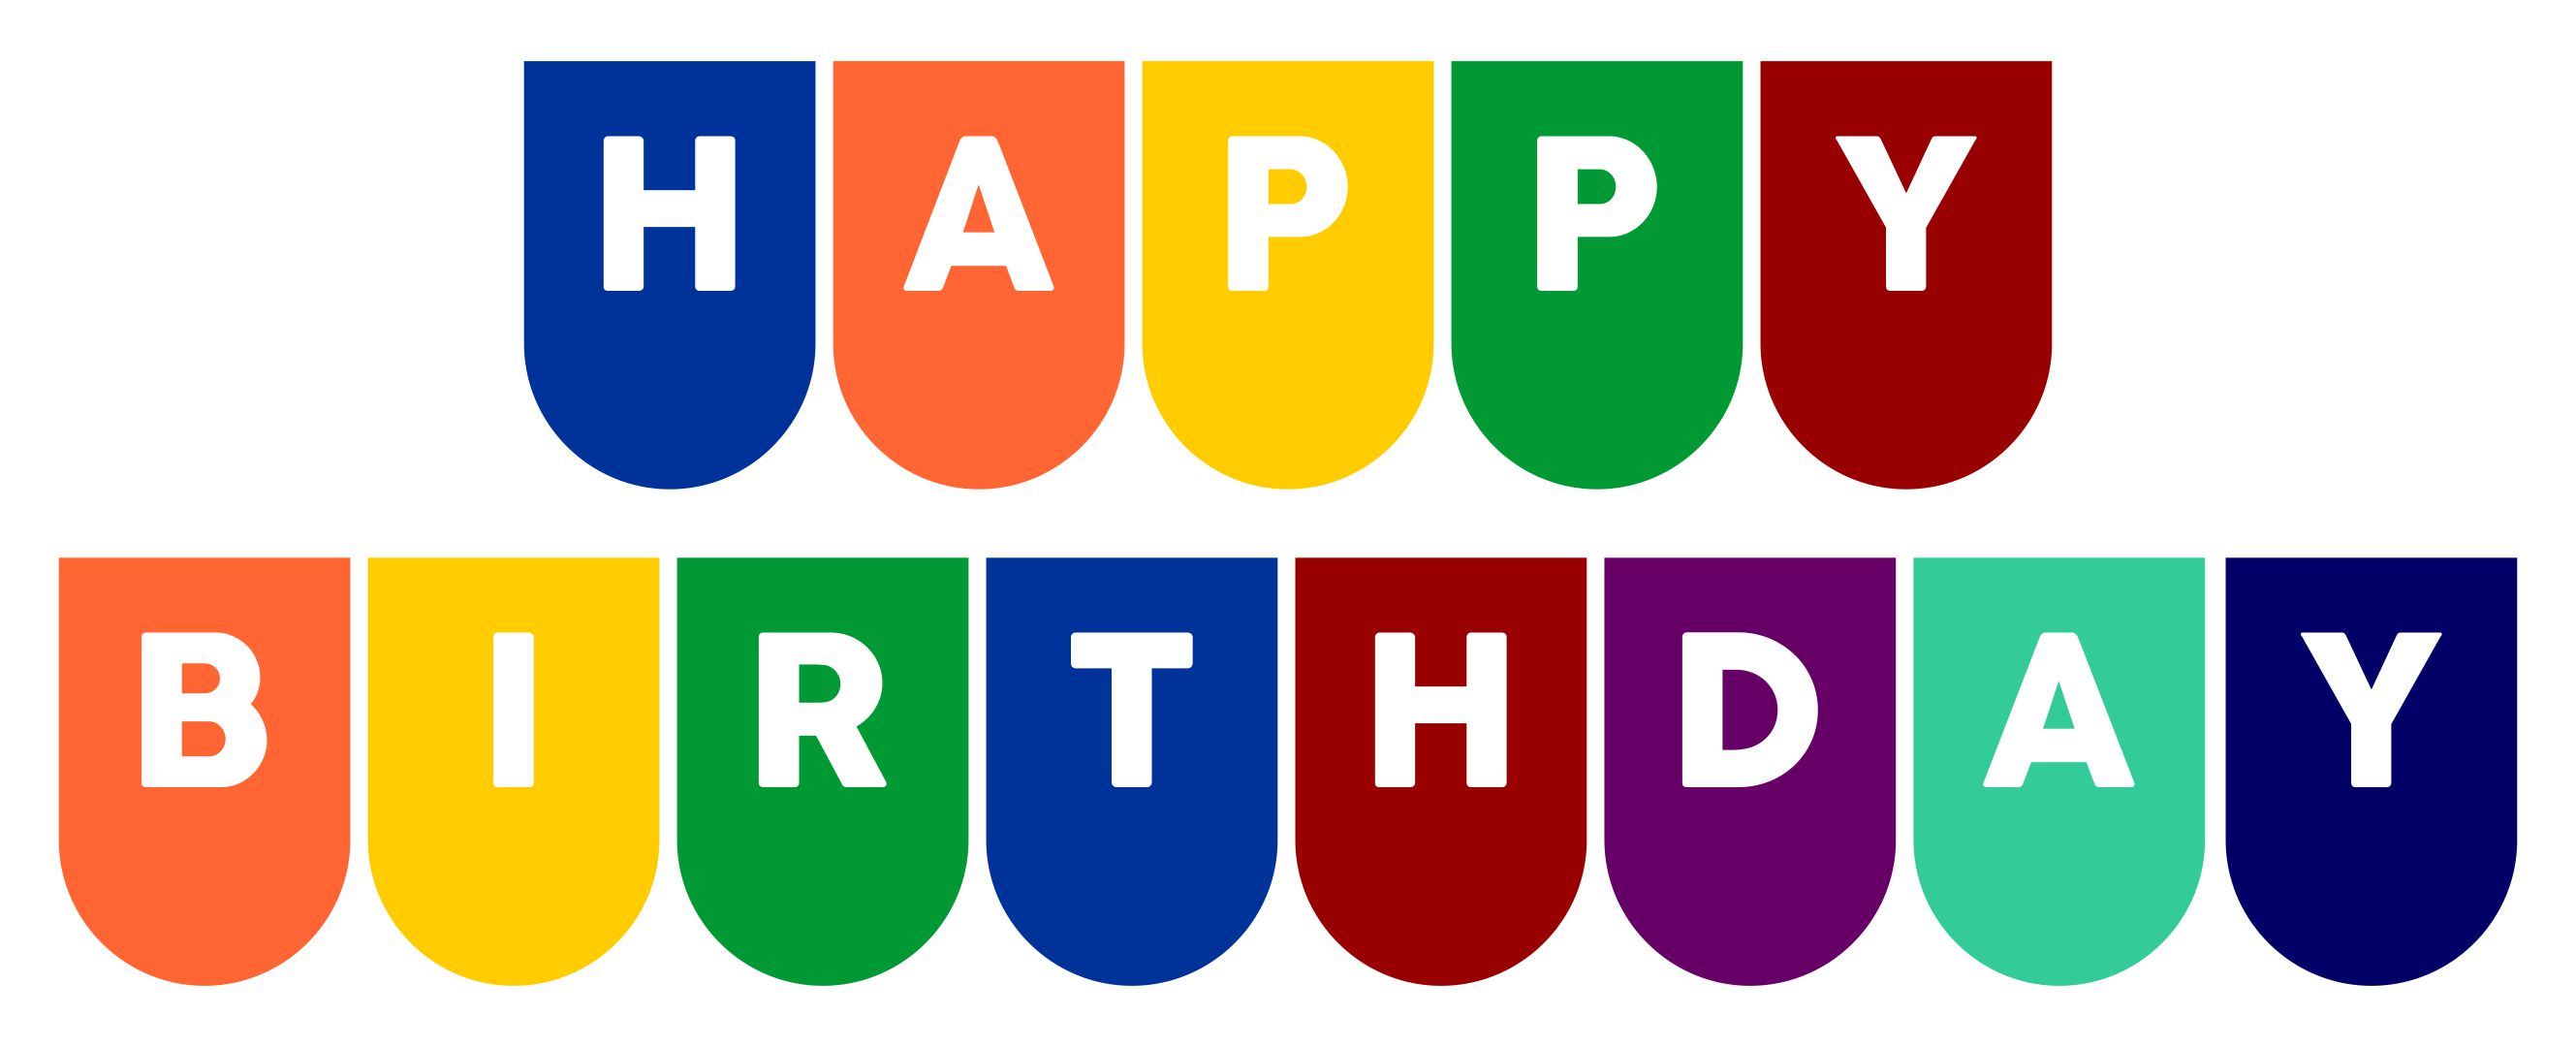 22 Best Happy Birthday Printable Banners Signs - printablee.com Intended For Free Happy Birthday Banner Templates Download